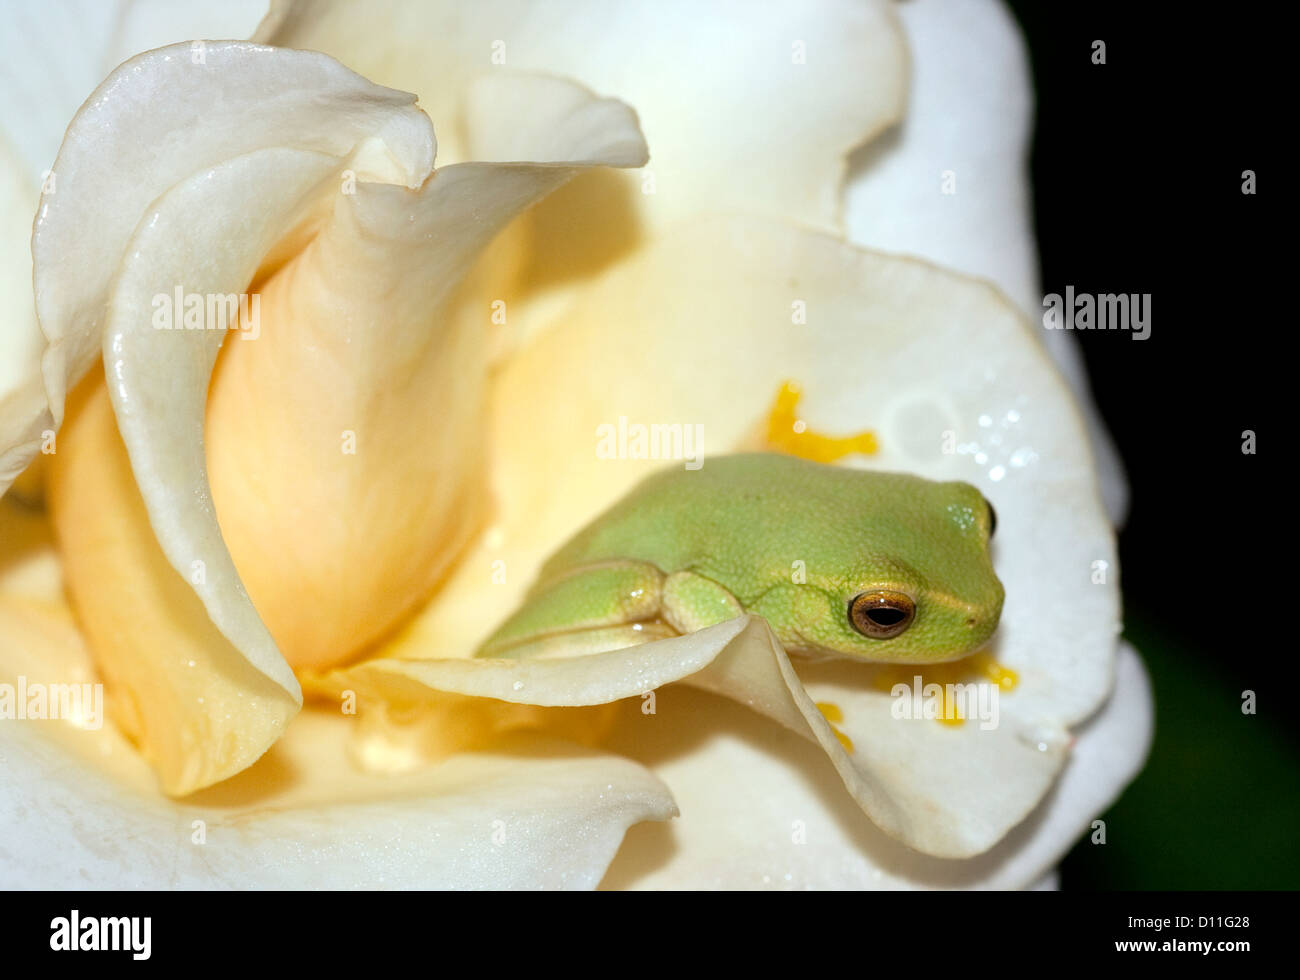 Tiny bright green dainty tree frog Litoria gracilenta on pale yellow petals of a rose against black background Stock Photo